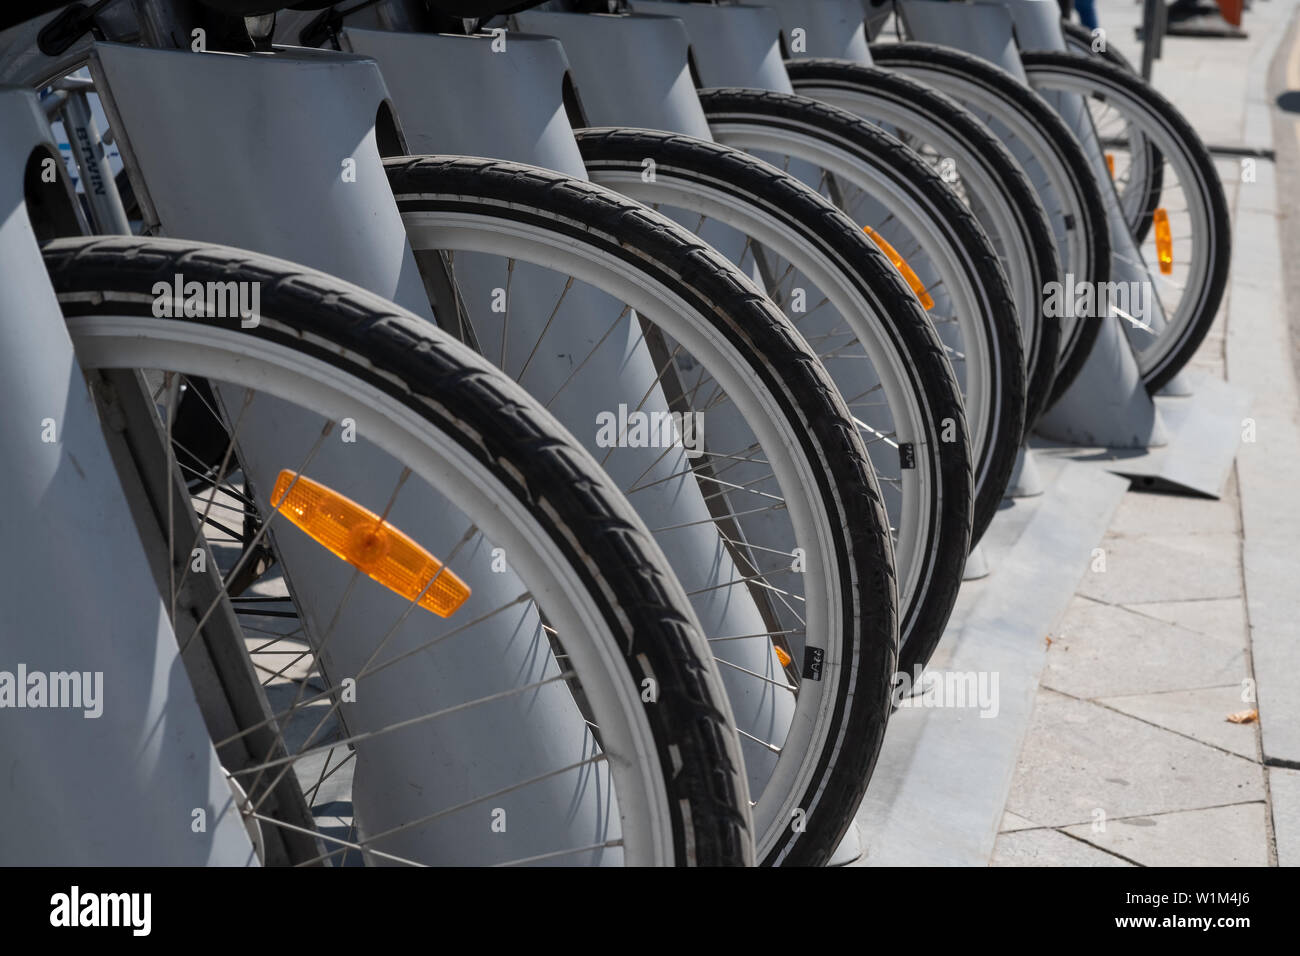 description: Wheels of parked bikes in the bike rental Parking lot.Bike hire pick up station.Rent a bike cheaply.Bicycle wheel in the perspective of t Stock Photo